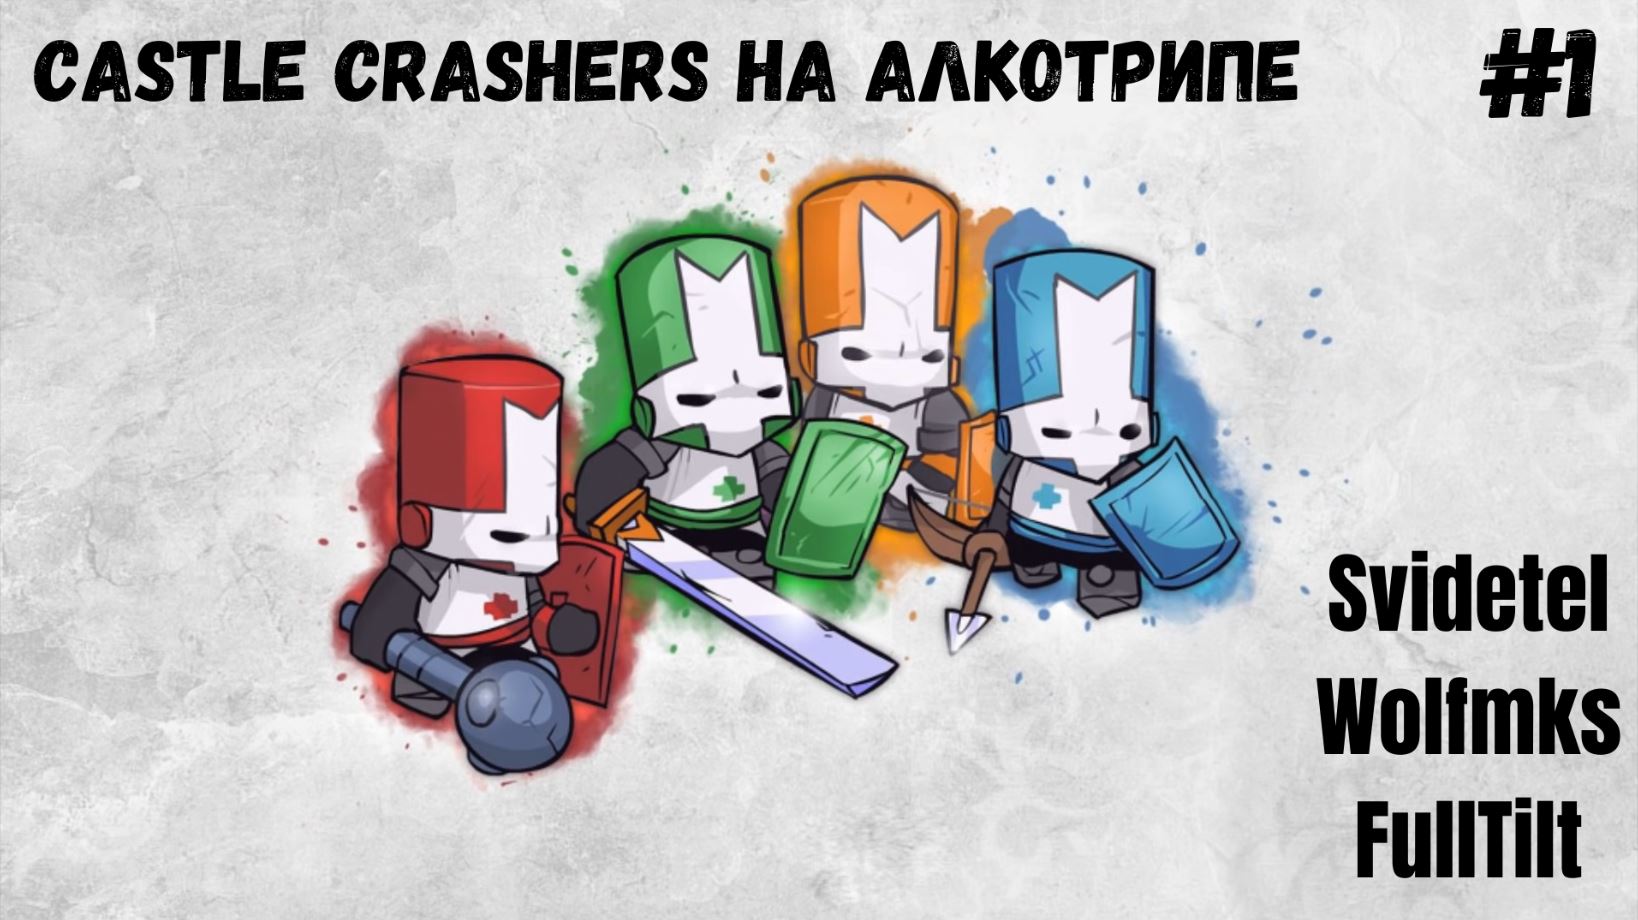 Кар крашерс 2. Castle Crashers. Castle Crashers 2. Castle Crashers all Bosses. Castle Crashers all Pets.